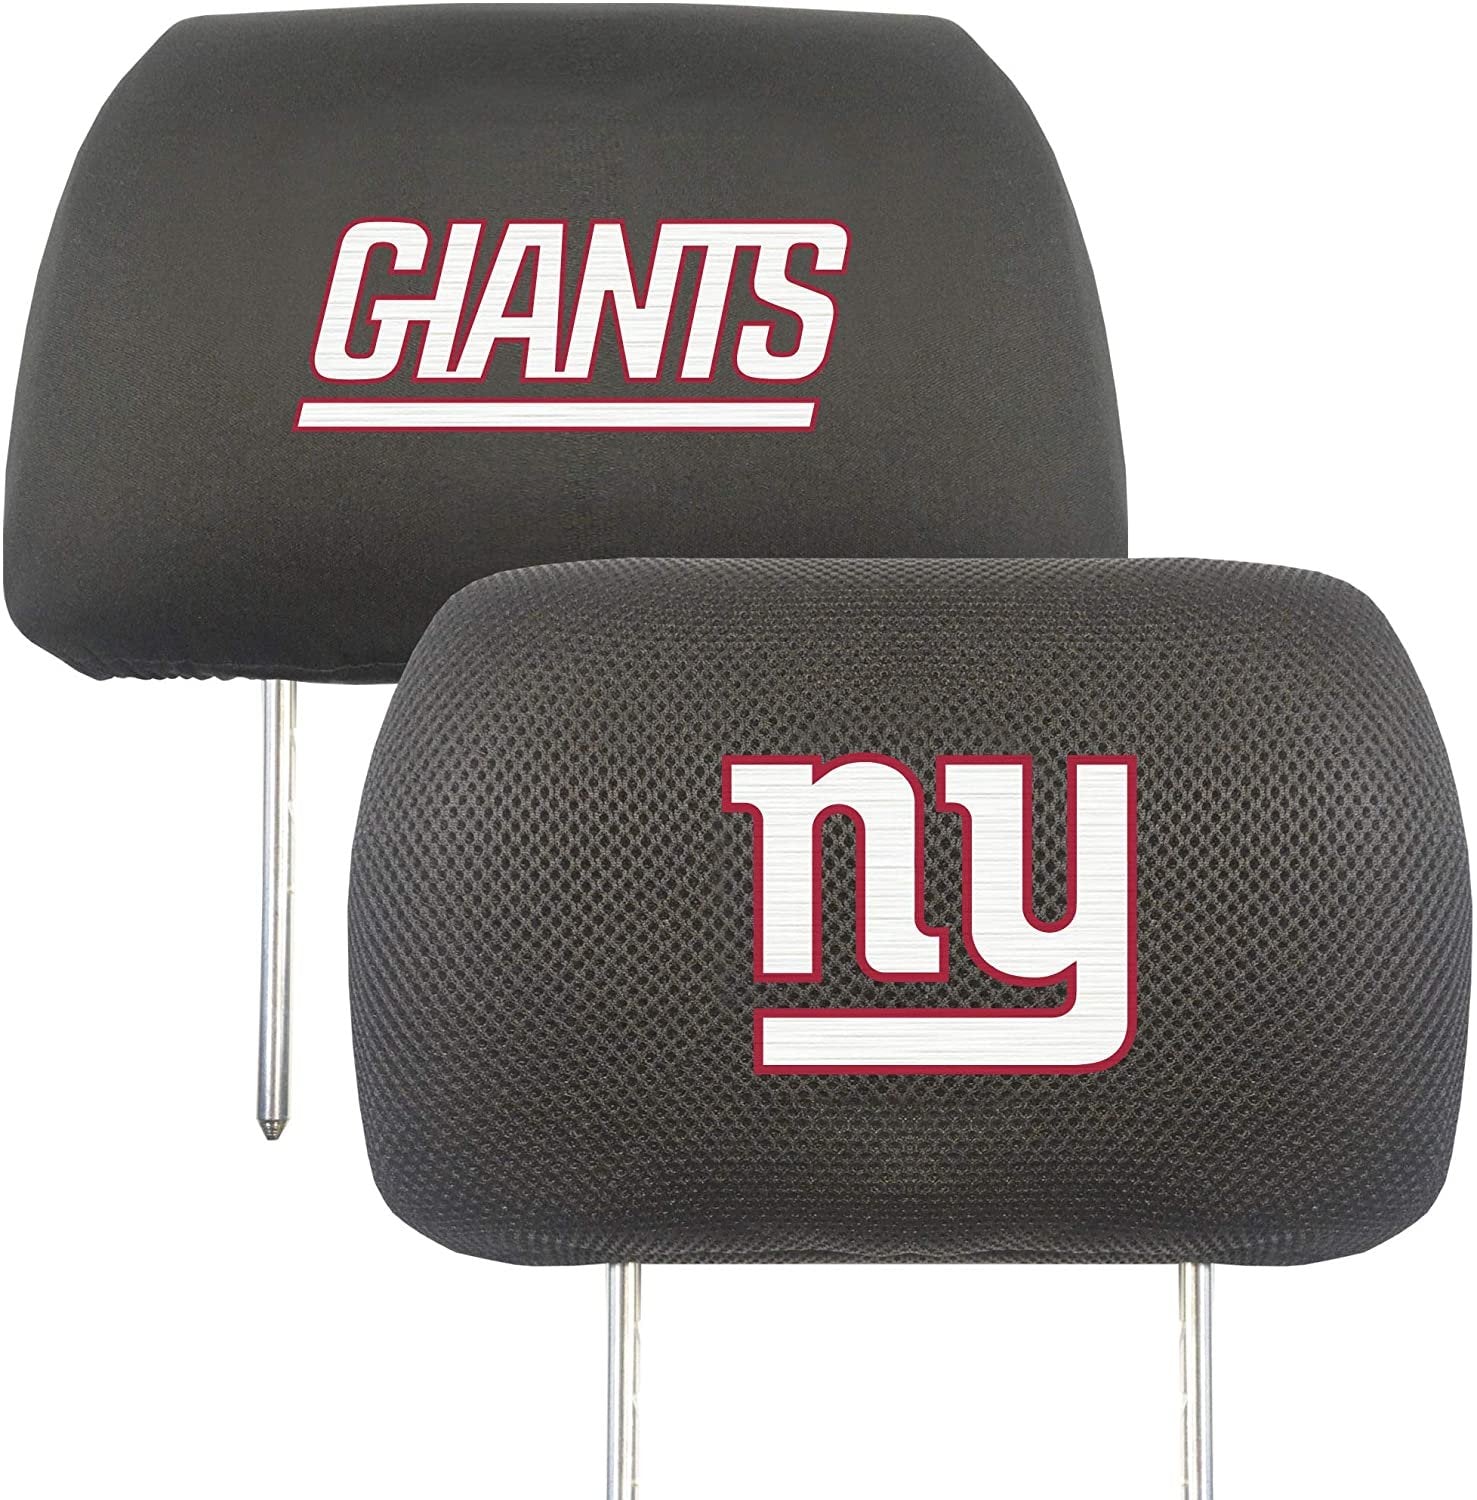 New York Giants Pair of Premium Auto Head Rest Covers, Embroidered, Black Elastic, 14x10 Inch